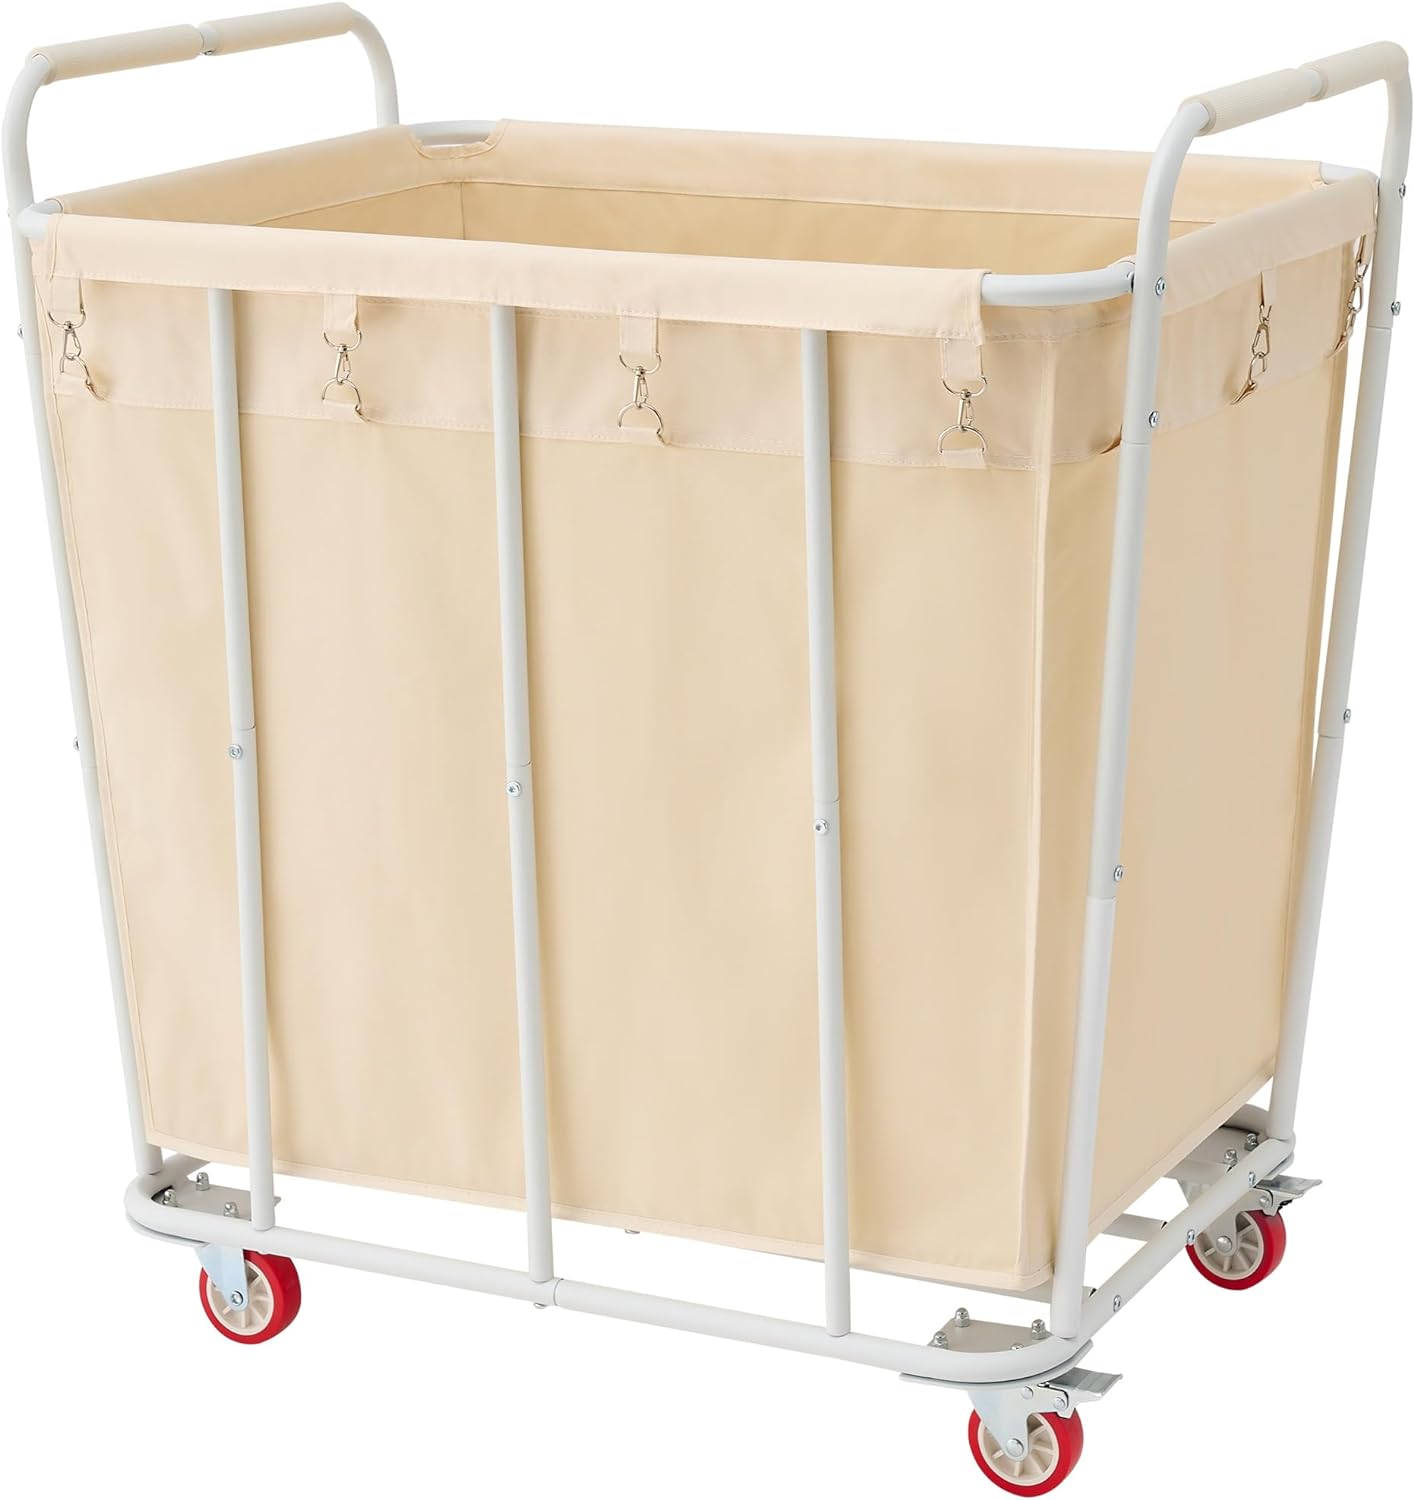 Hoctieon Large Rolling Laundry Hamper with Wheels, Laundry Sorter Cart for Clothes Storage, Durable Laundry Basket with Lockable Wheels, Heavy Duty Clothes Hamper for Laundry & Bedroom, Beige